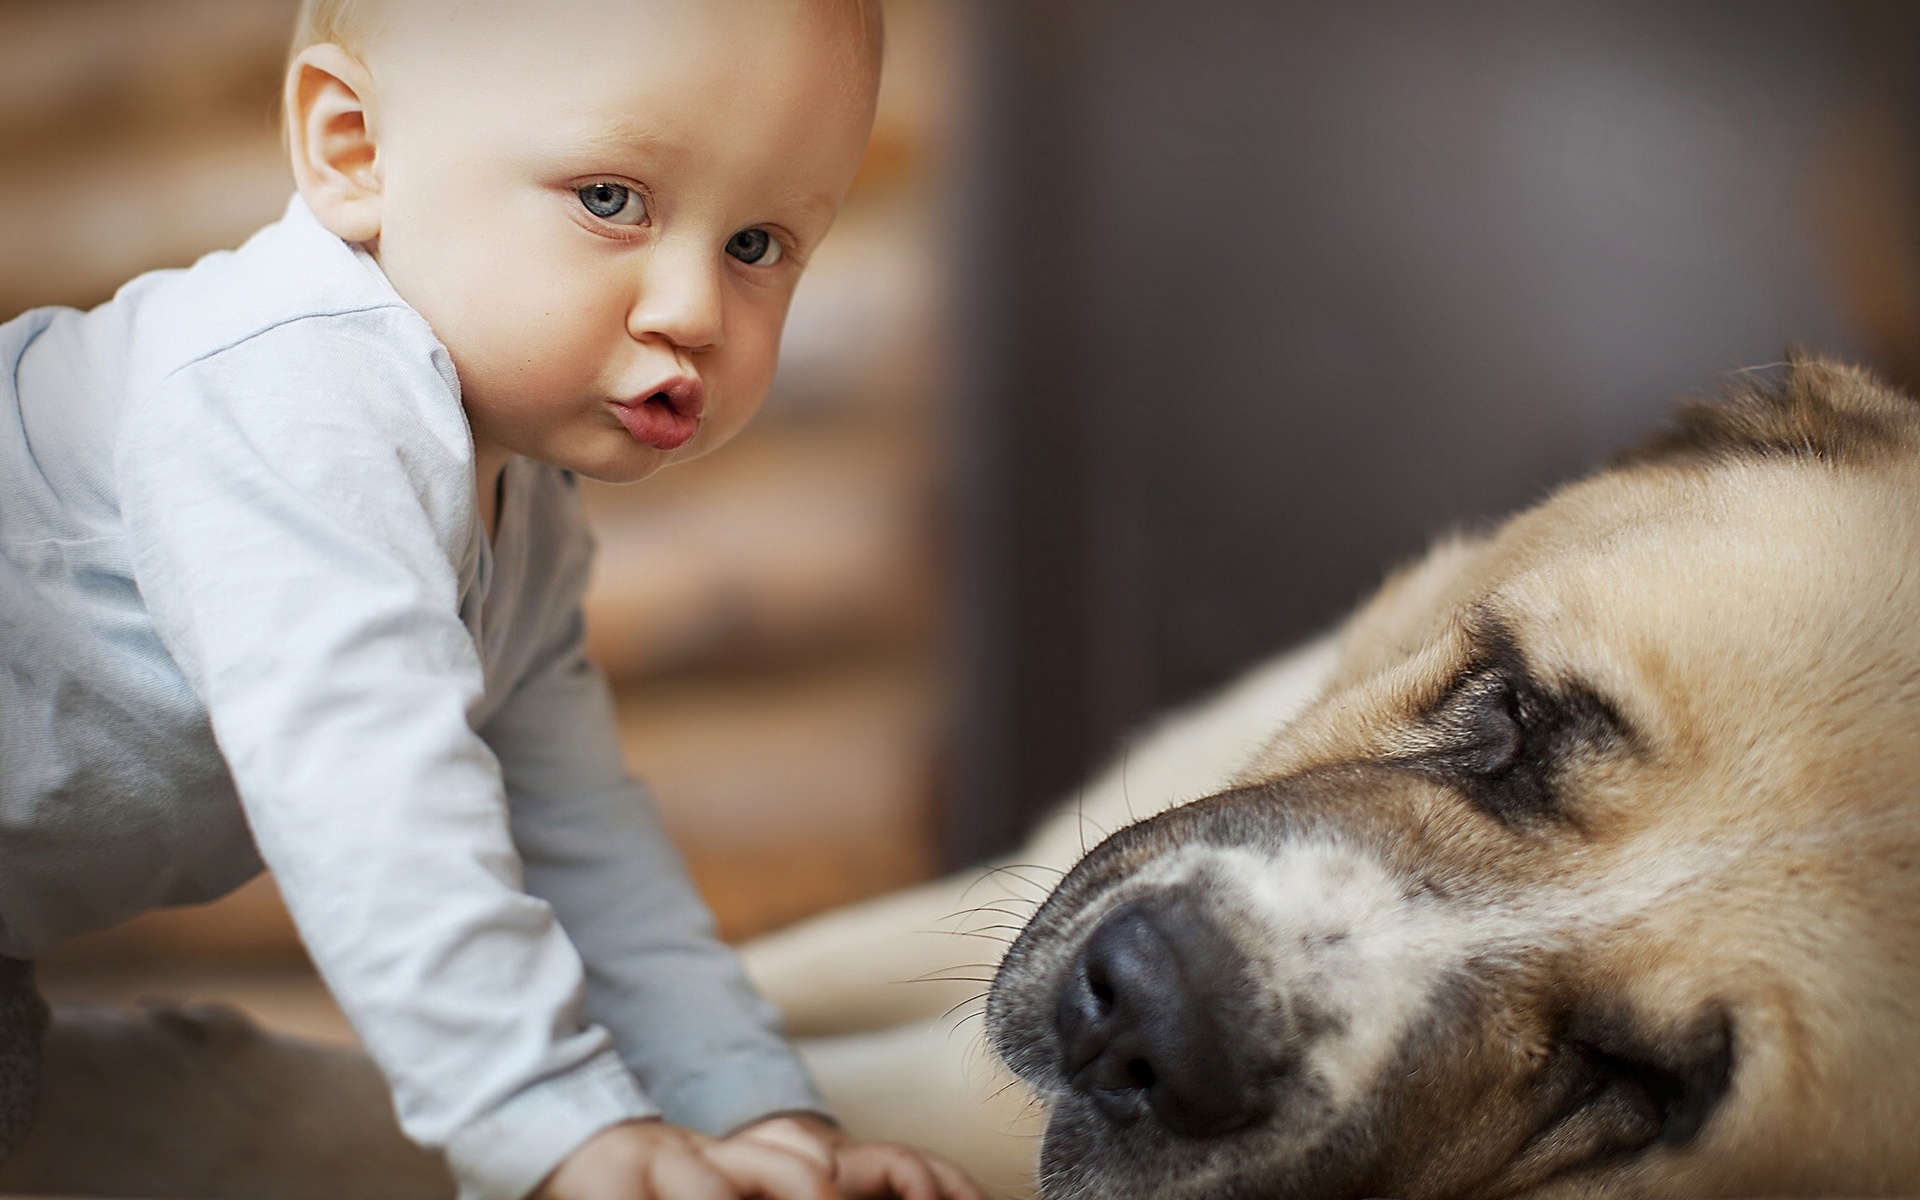 people, Babies, Children, Cute, Photography, Mood, Emotion, Friends, Animals, Dogs, Love, Fur, Face, Eyes, Expression Wallpaper